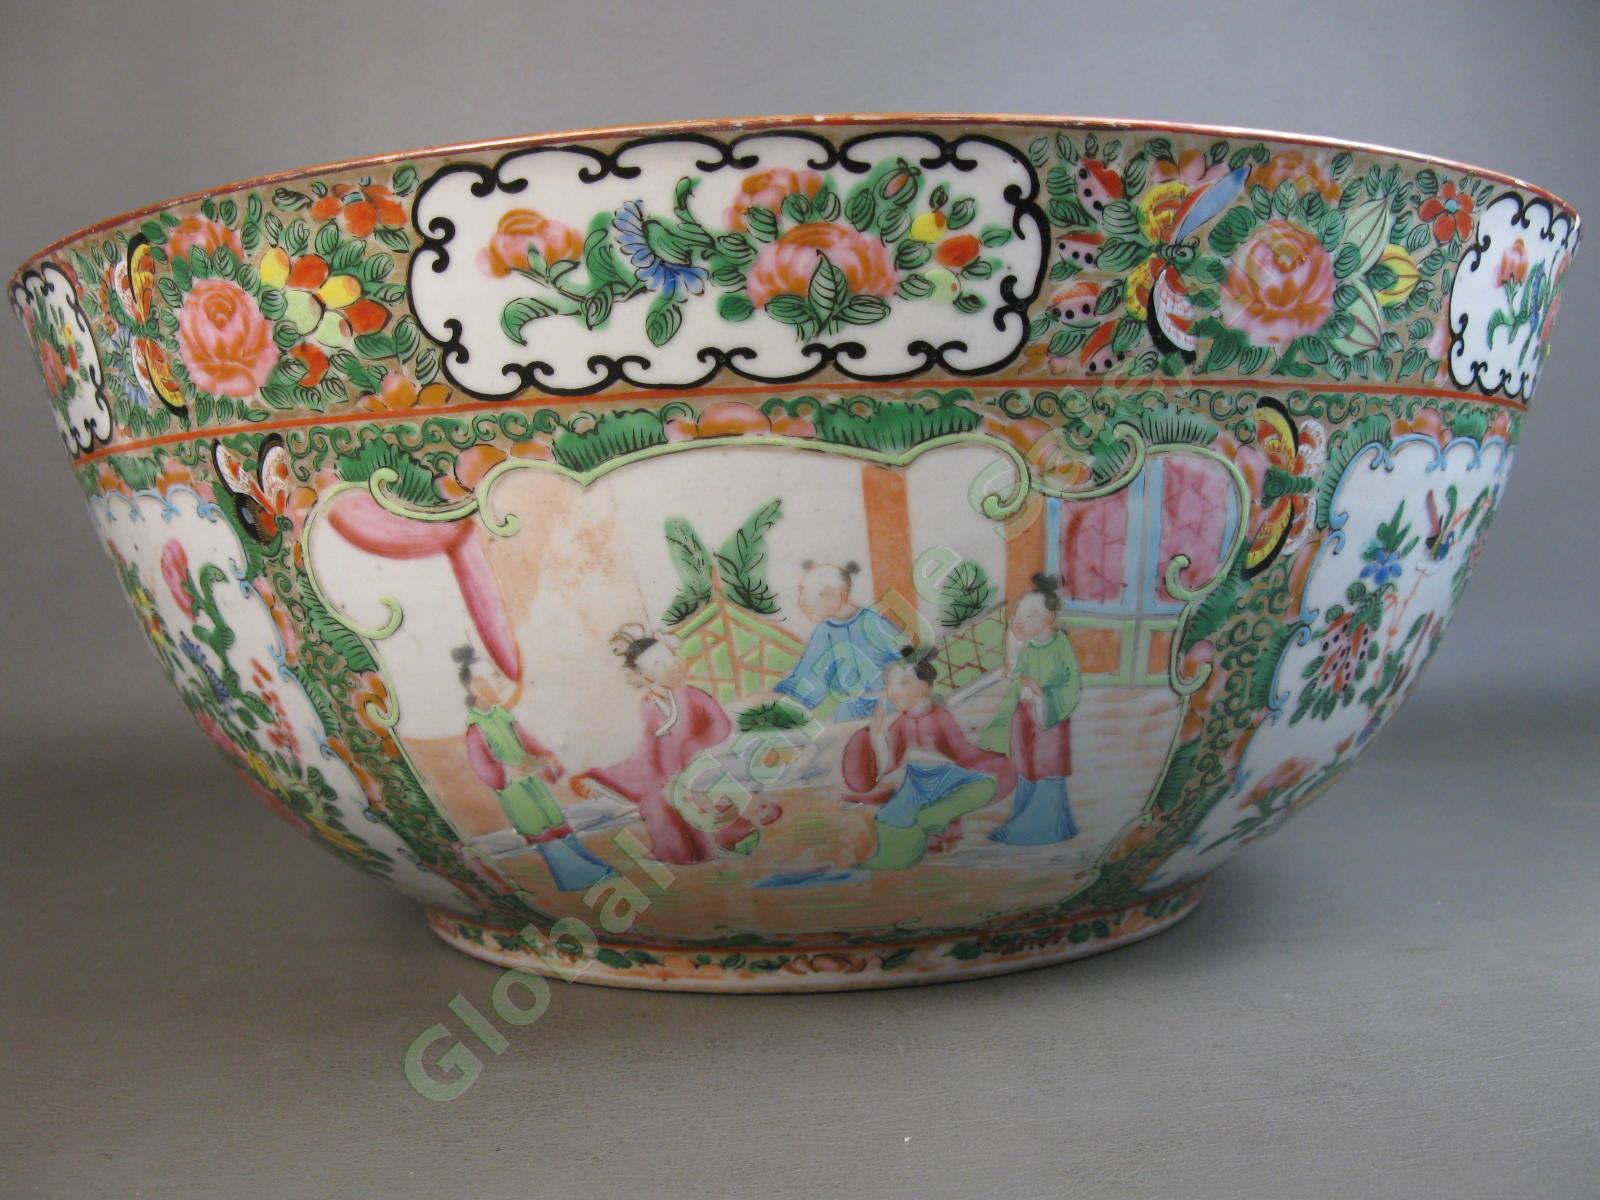 RARE Antique Chinese Early 19th C Large Famille Rose Medallion Punch Bowl 15" NR 2